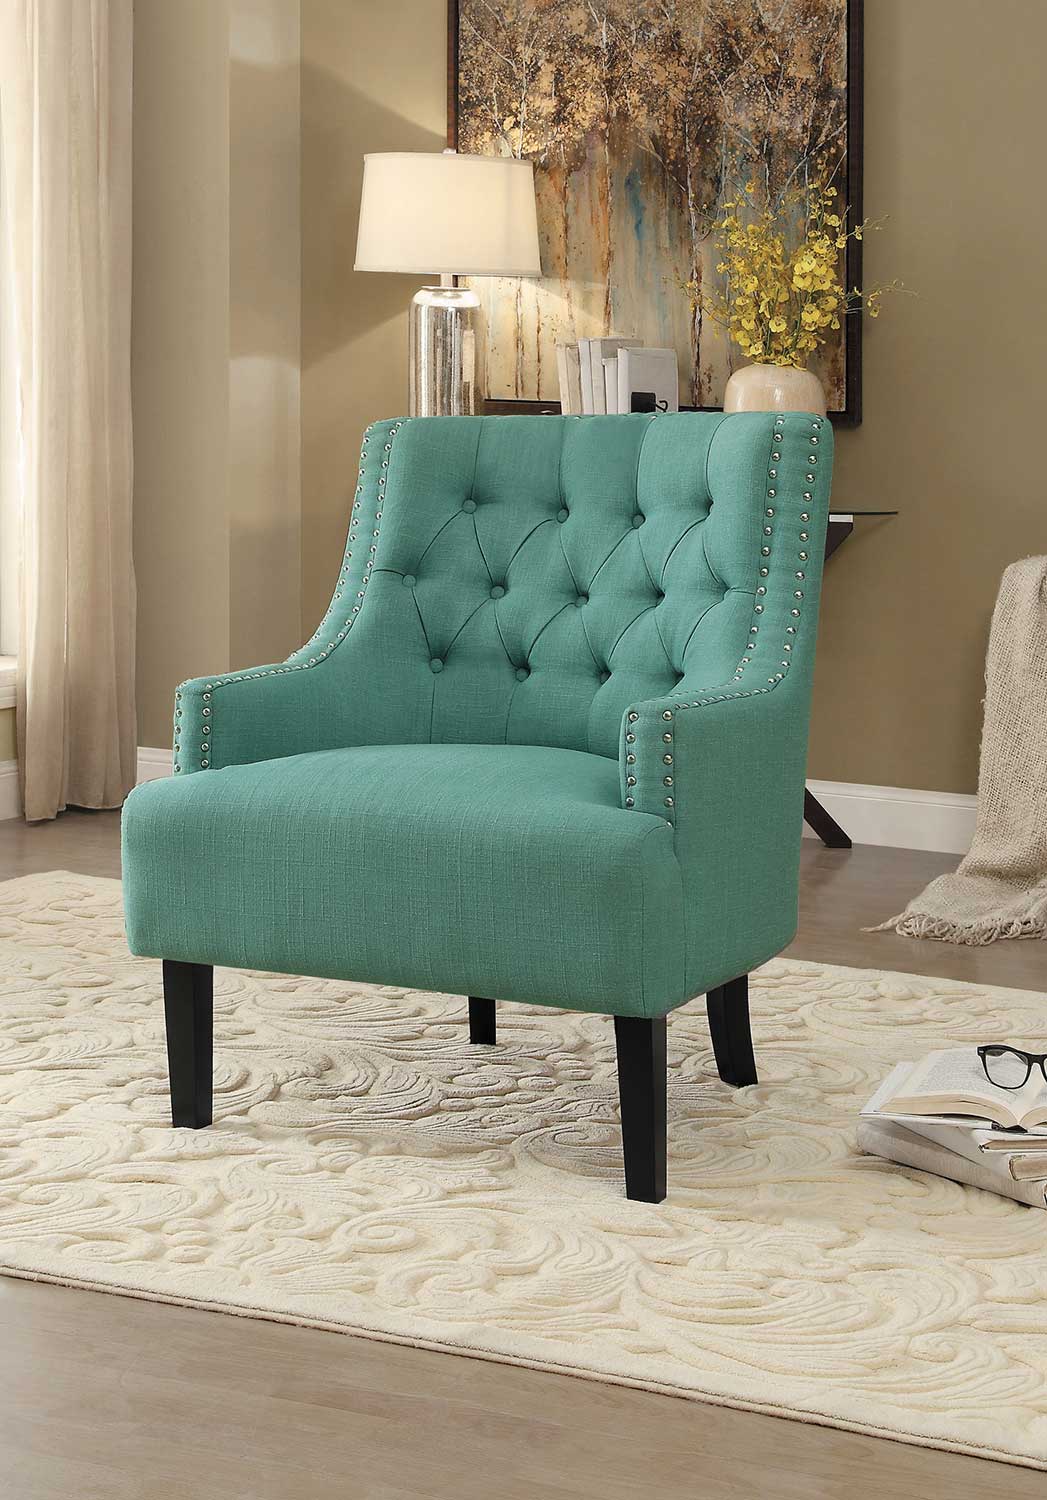 Homelegance Charisma Accent Chair - Teal 1194TL at Homelement.com